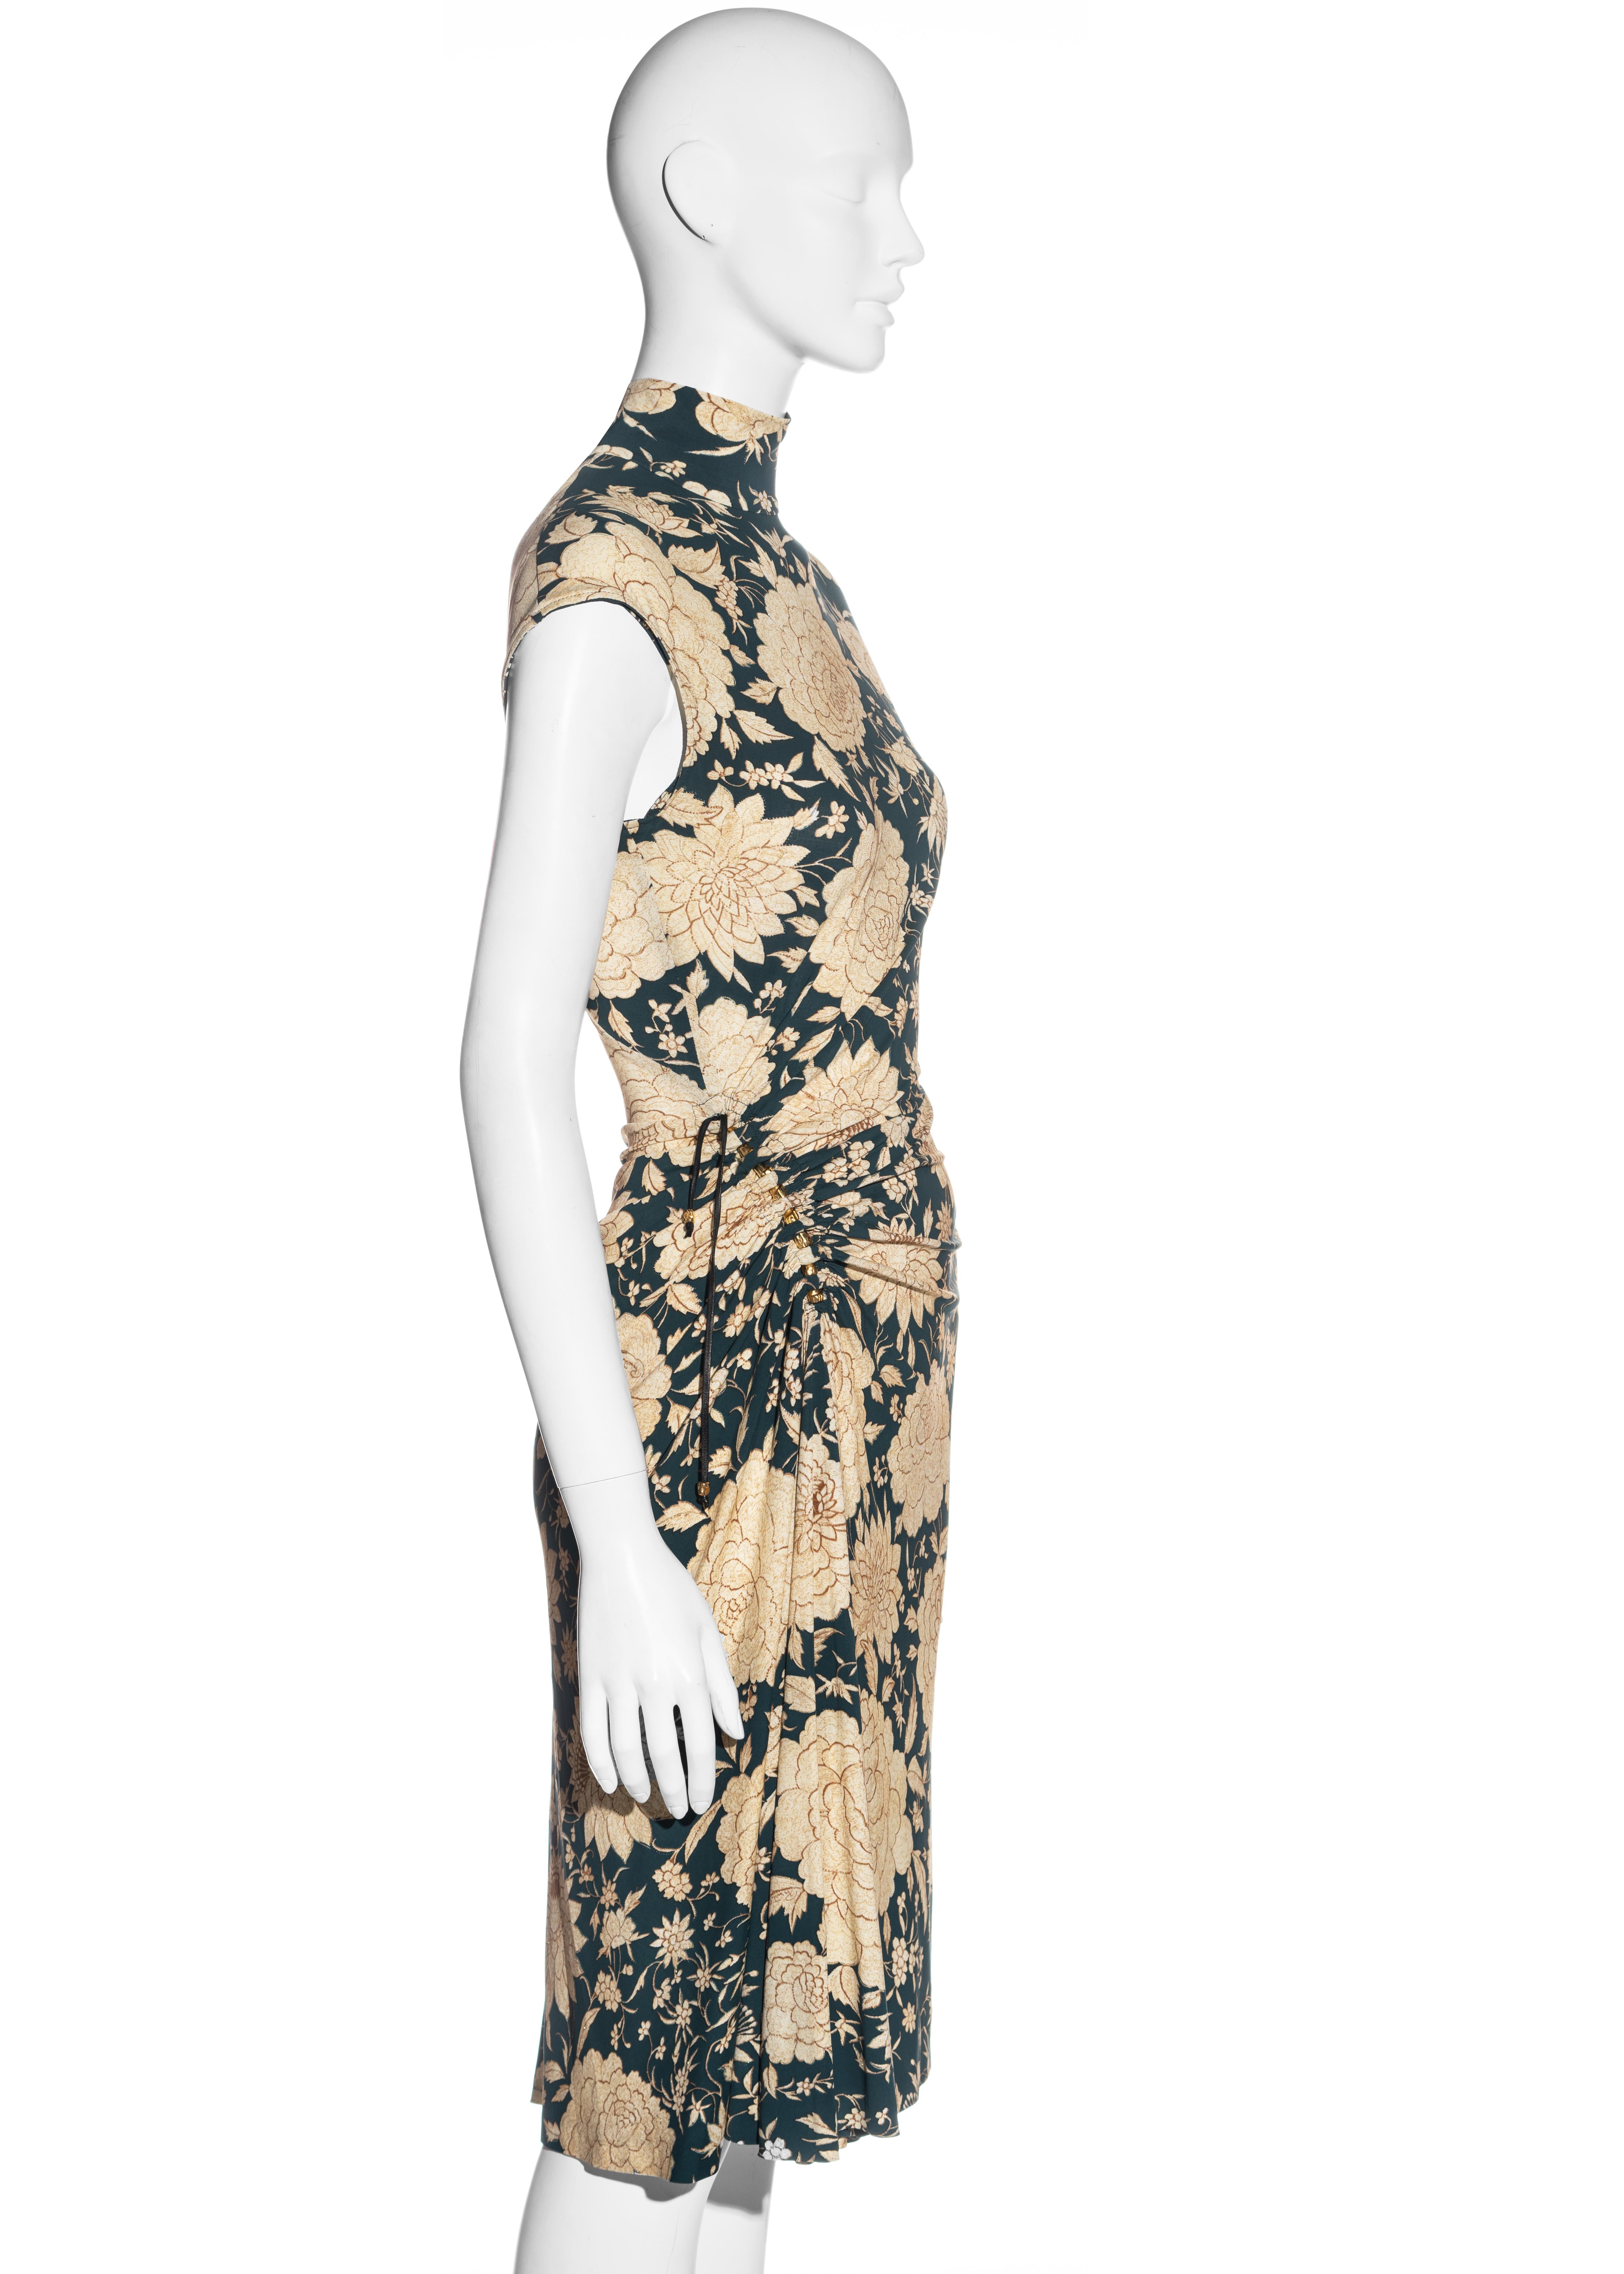 Women's Roberto Cavalli teal and gold floral ruched drawstring evening dress, c. 2000s